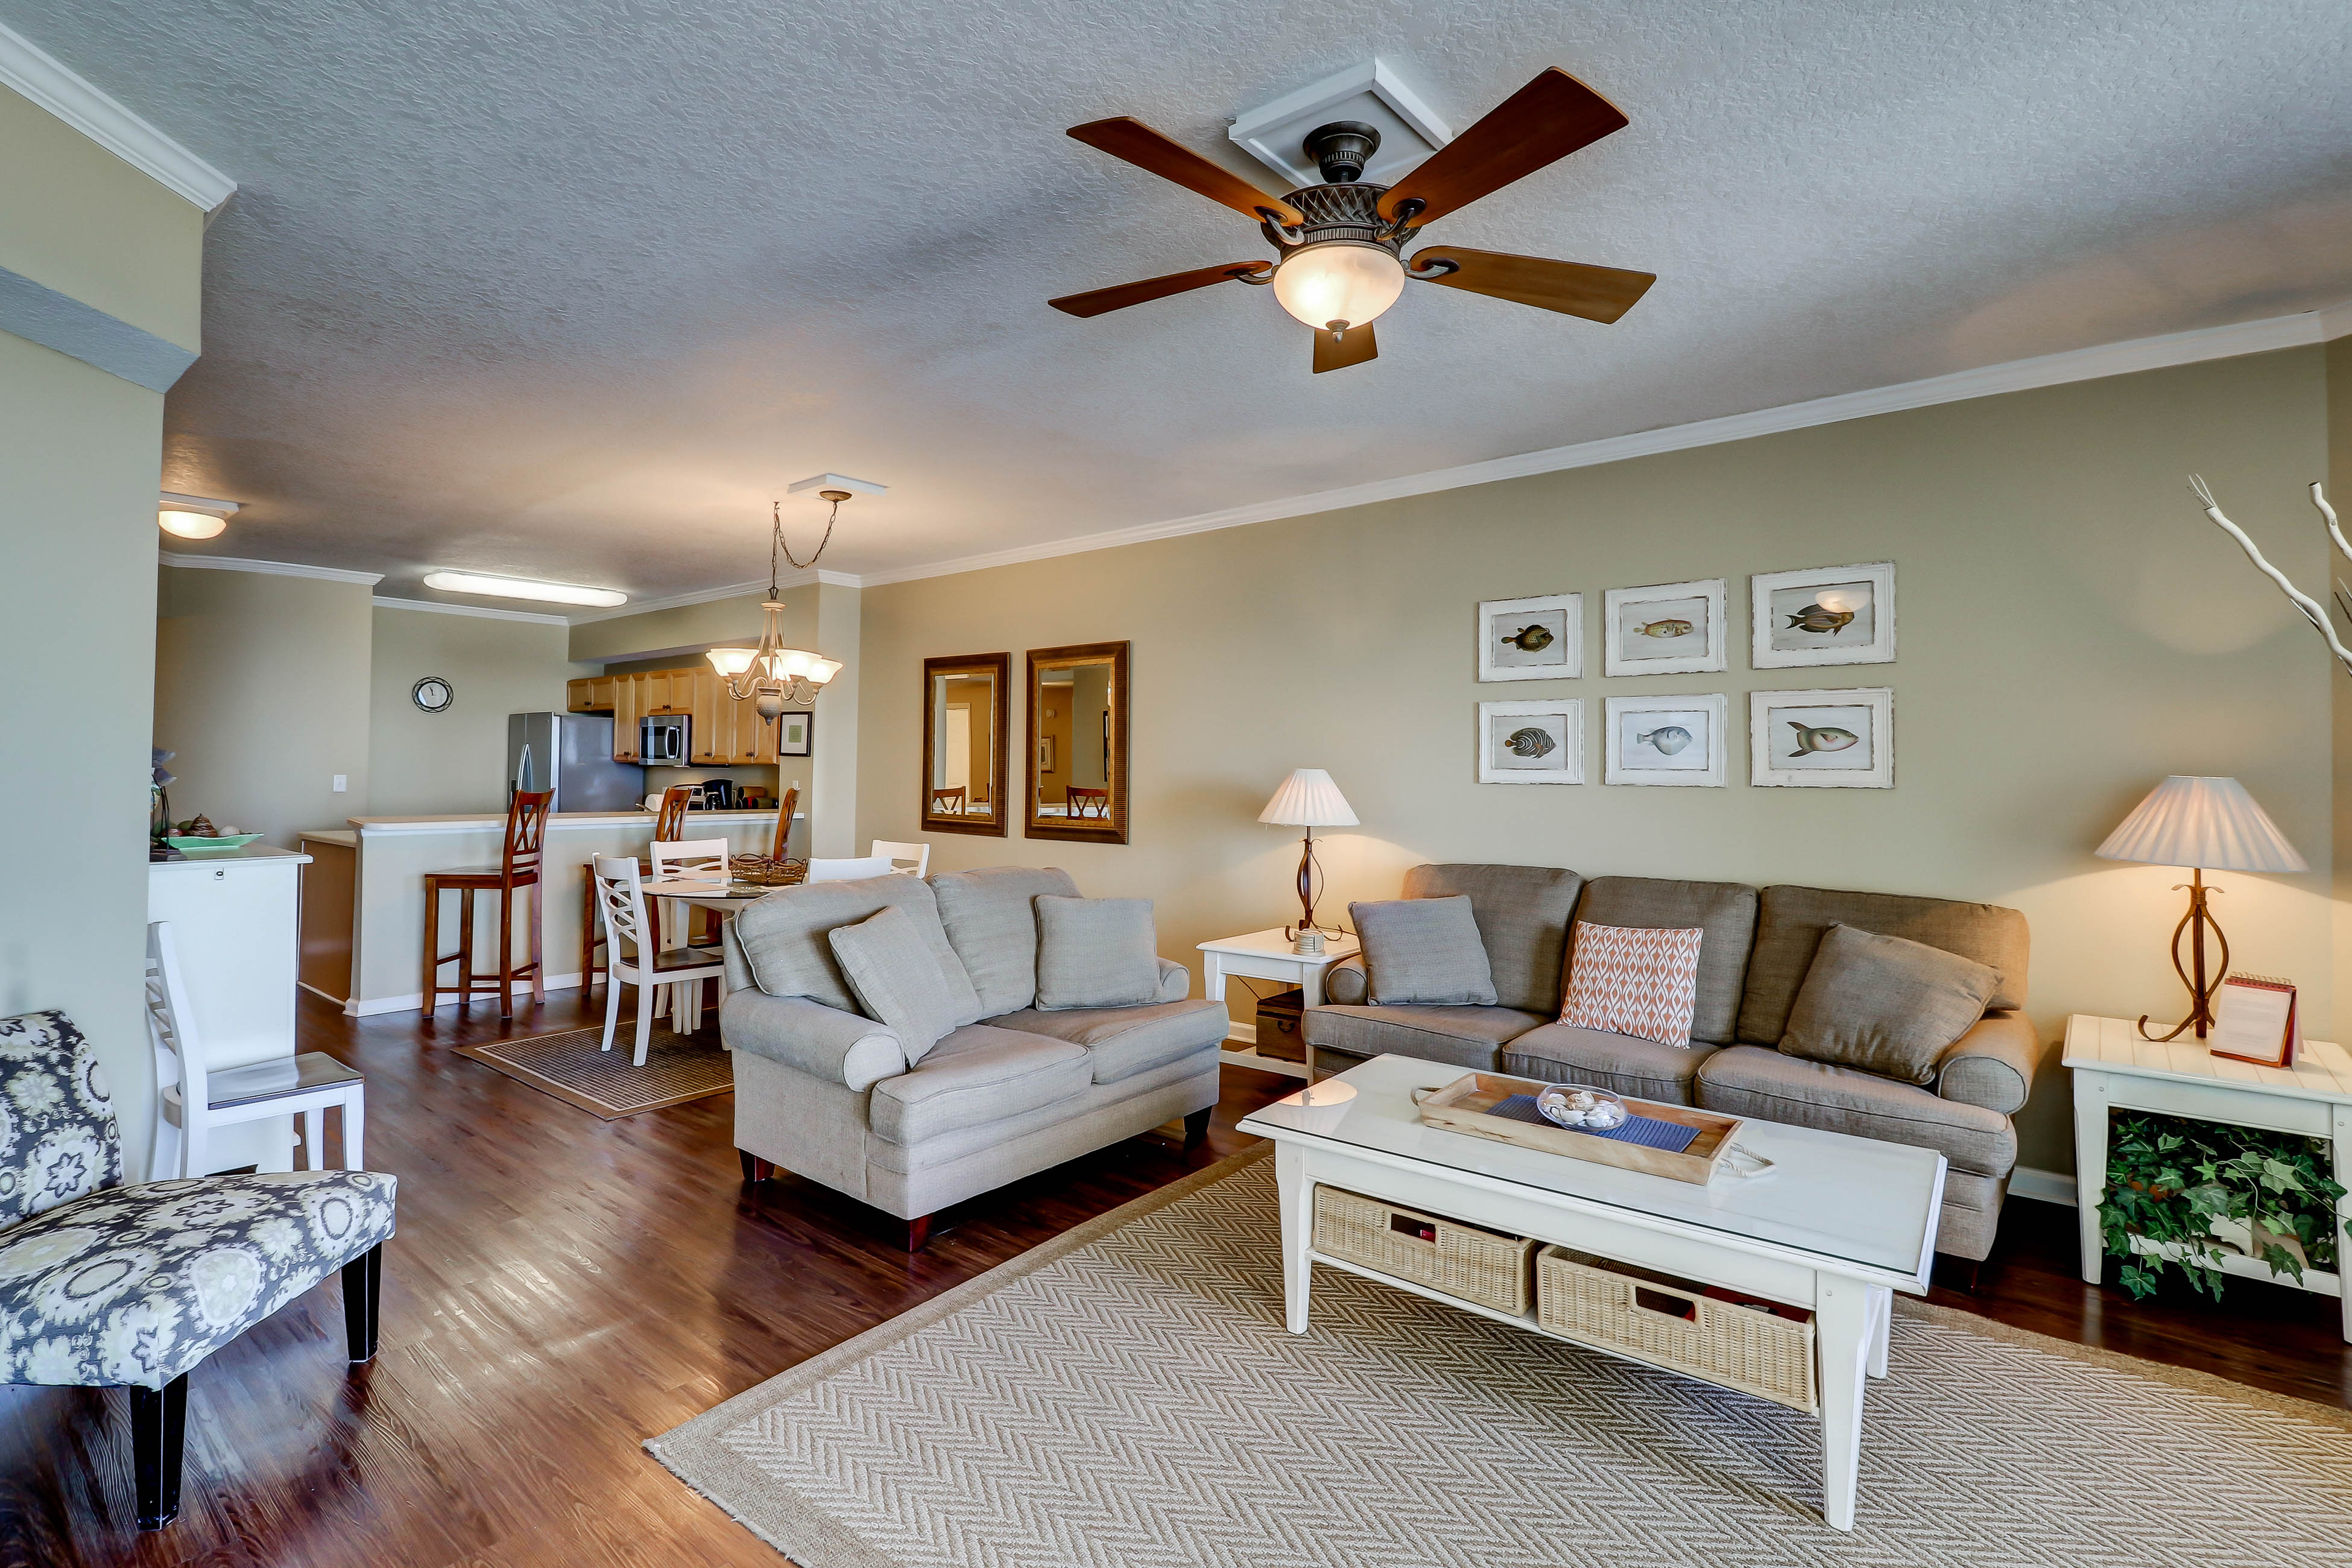 Dunes of Seagrove A307 Condo rental in Dunes of Seagrove in Highway 30-A Florida - #3